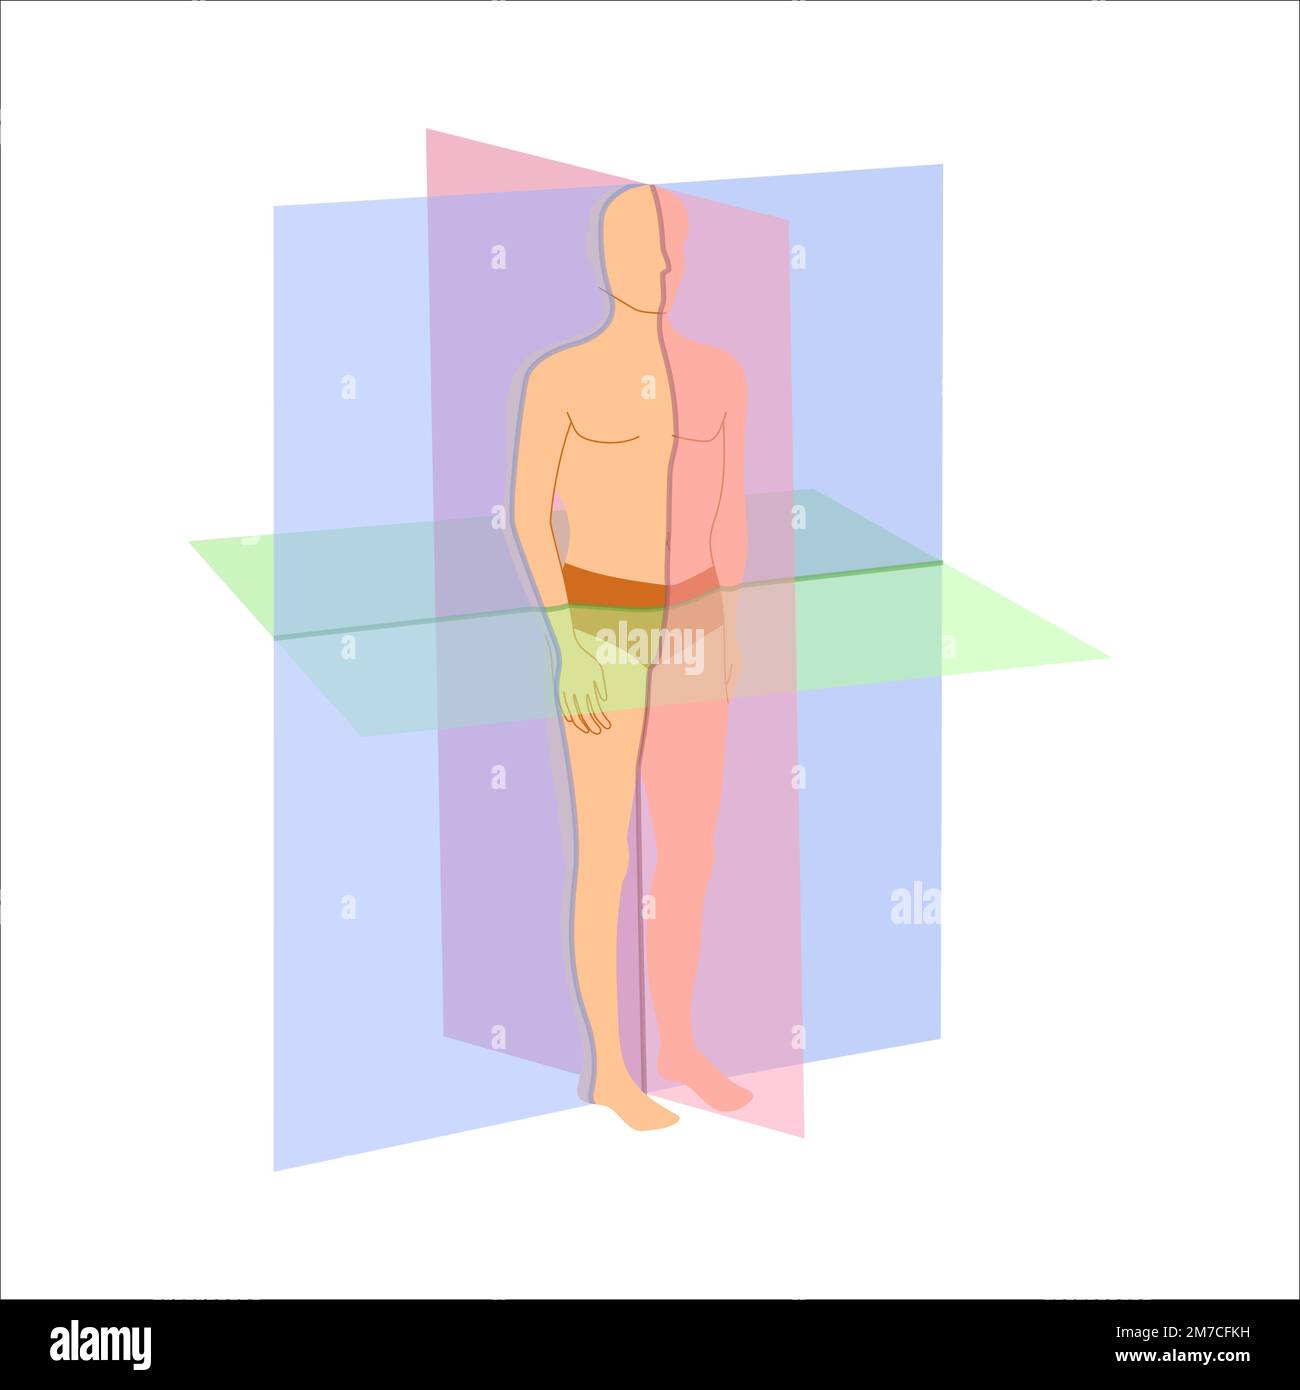 Scanning planes for body orientation position diagram Stock Vector